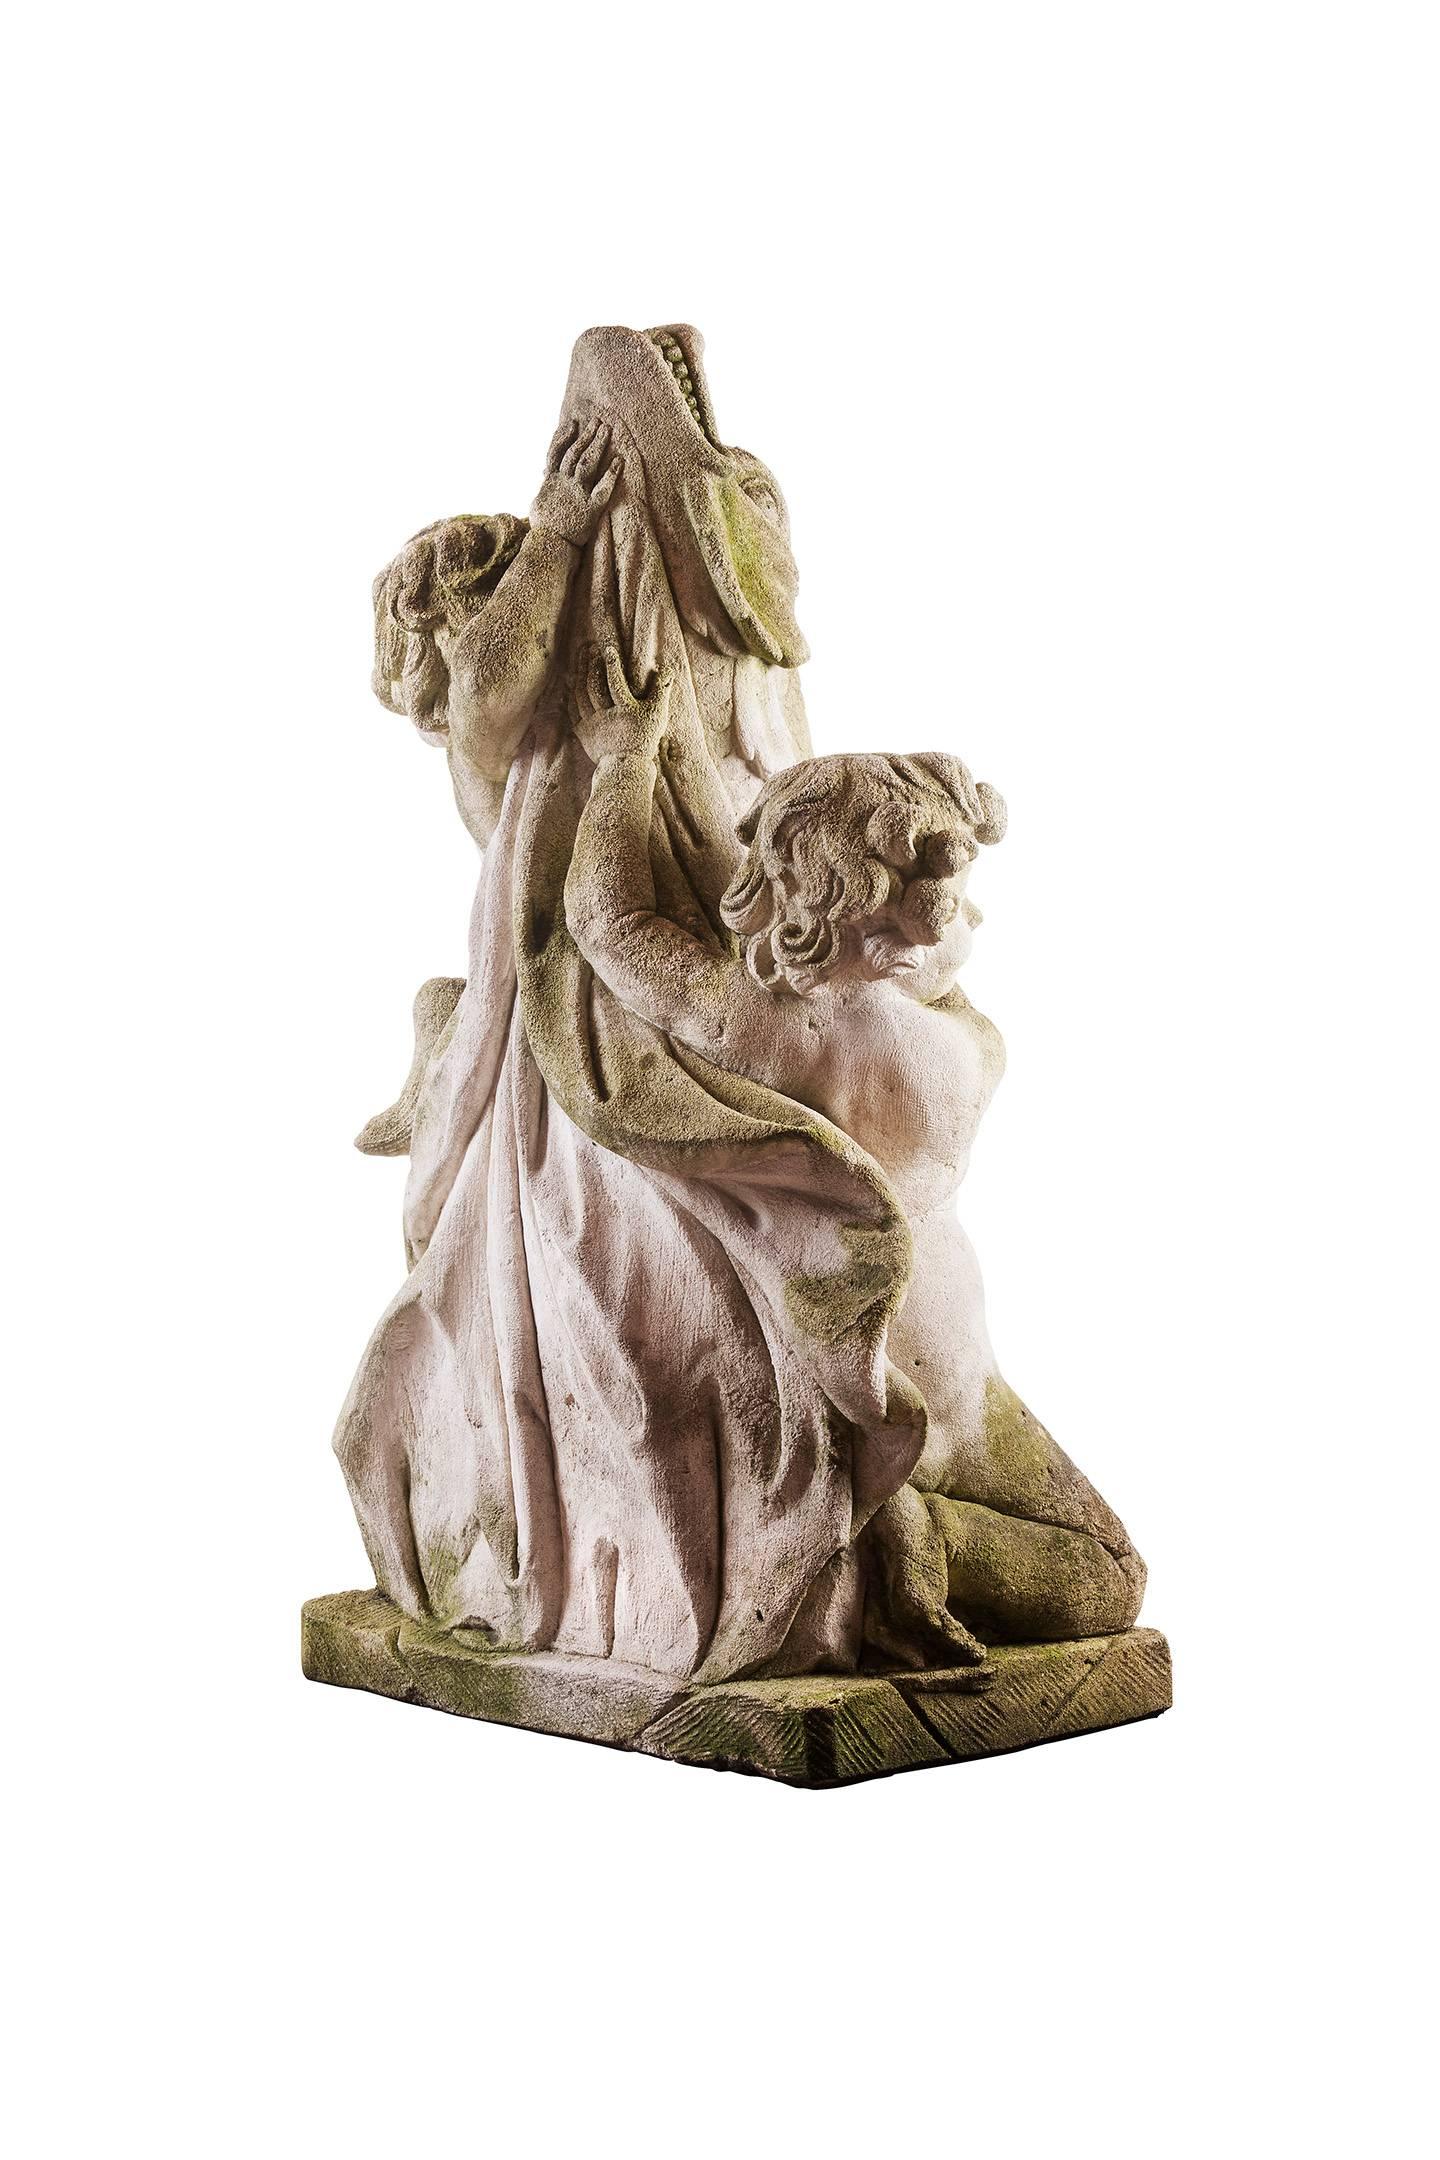 Centrepiece for your garden.
With wather or only as decoration
Nice sculpture.